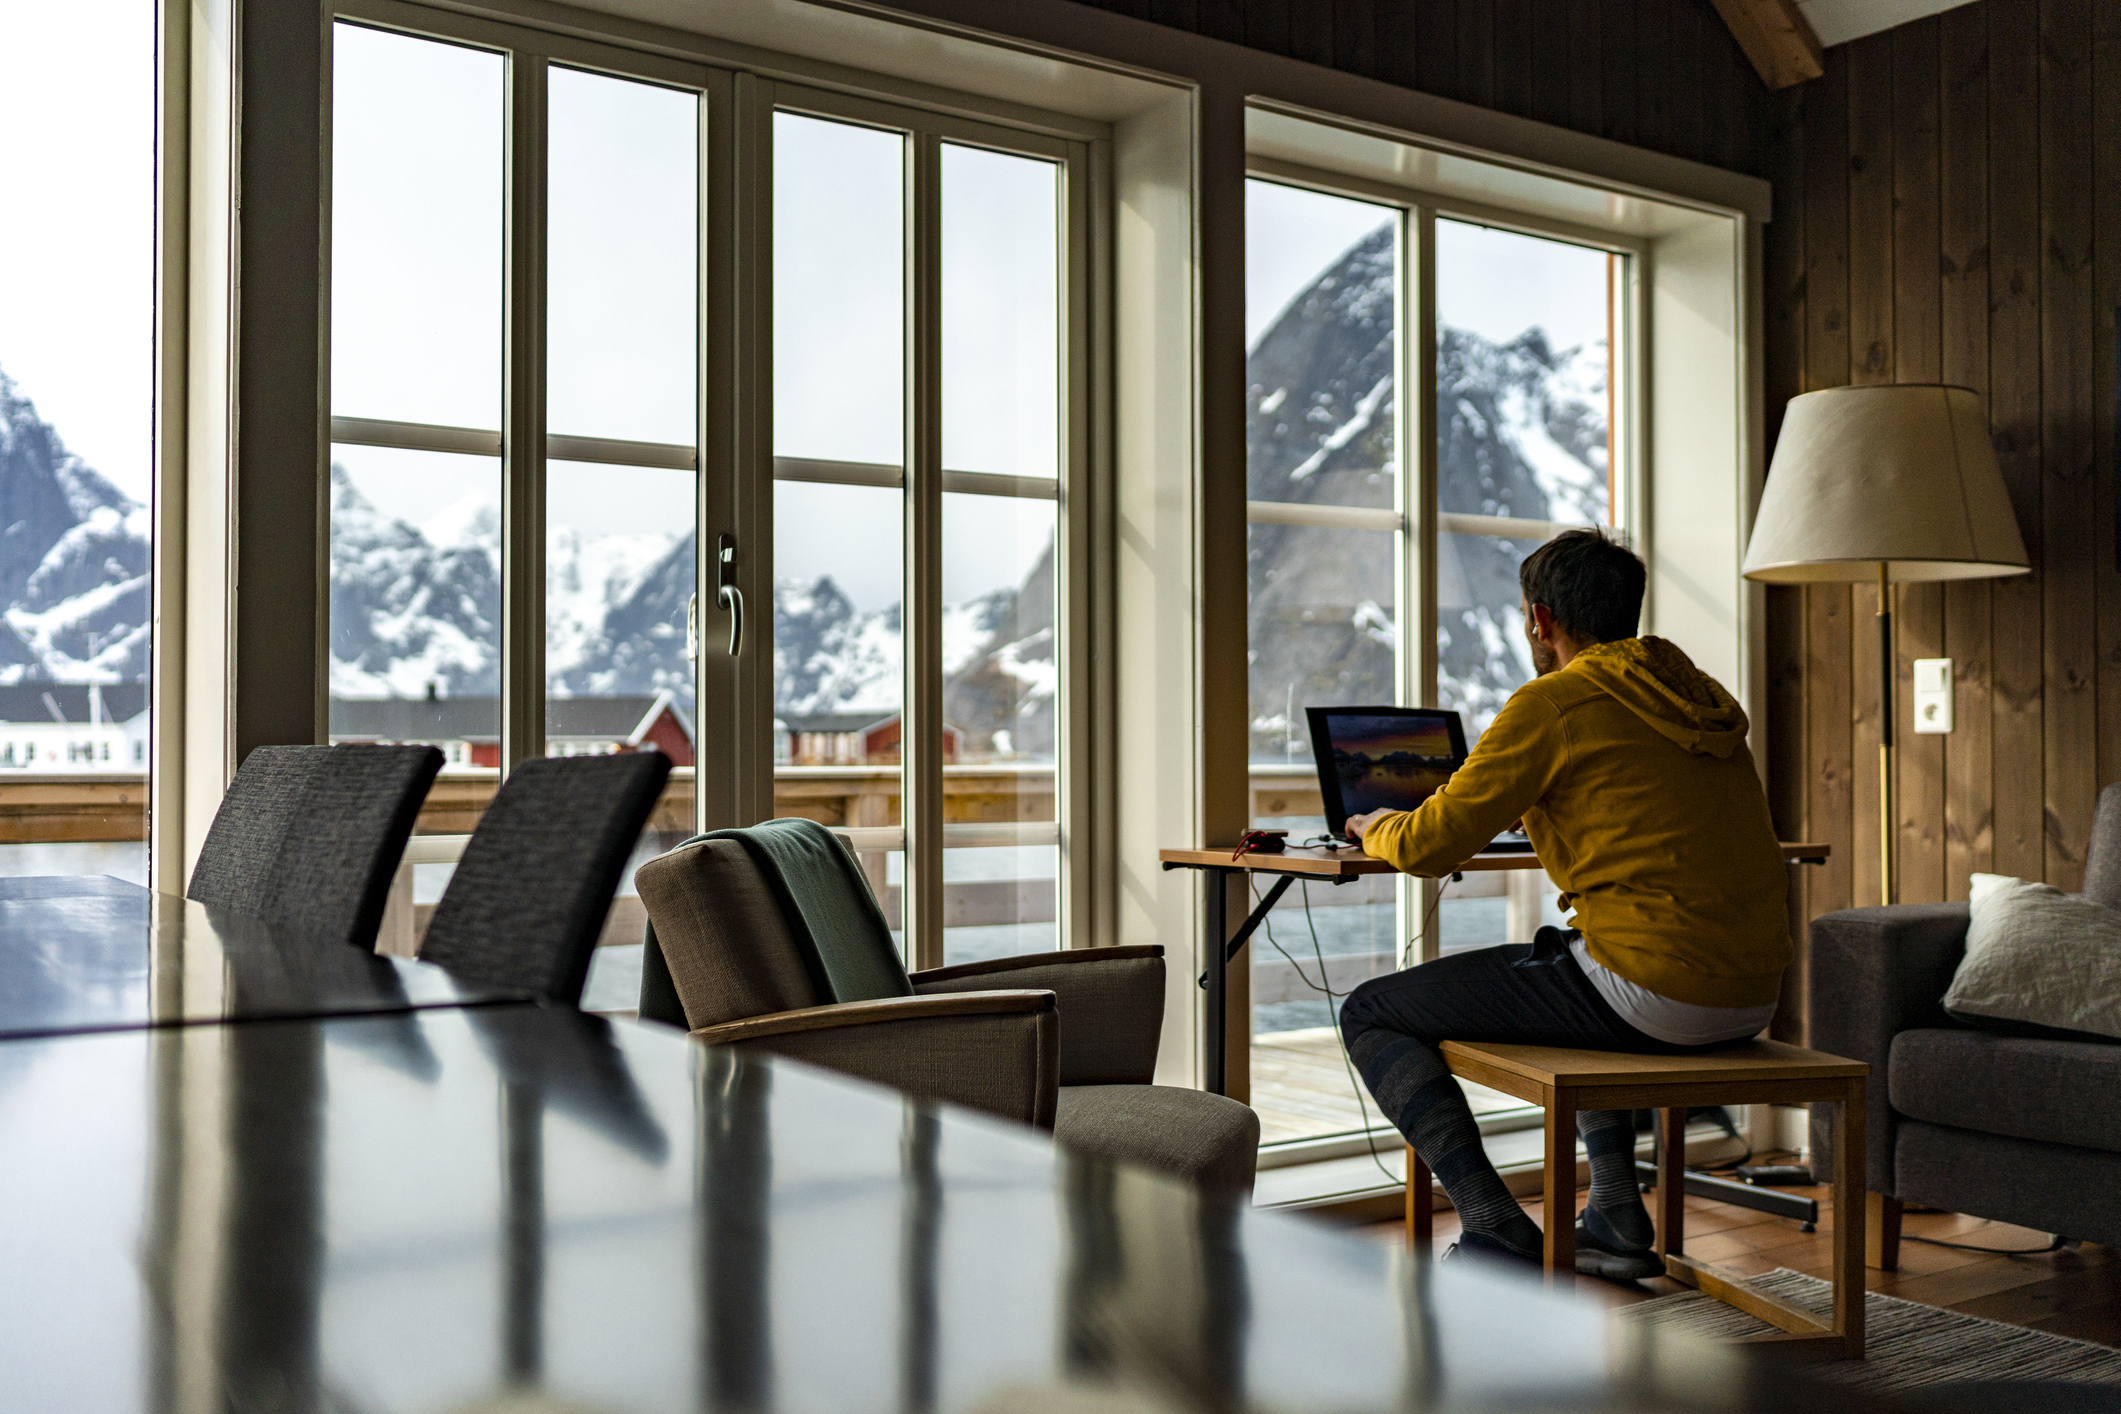 A young person working on a laptop in front of a big window with a mountain view